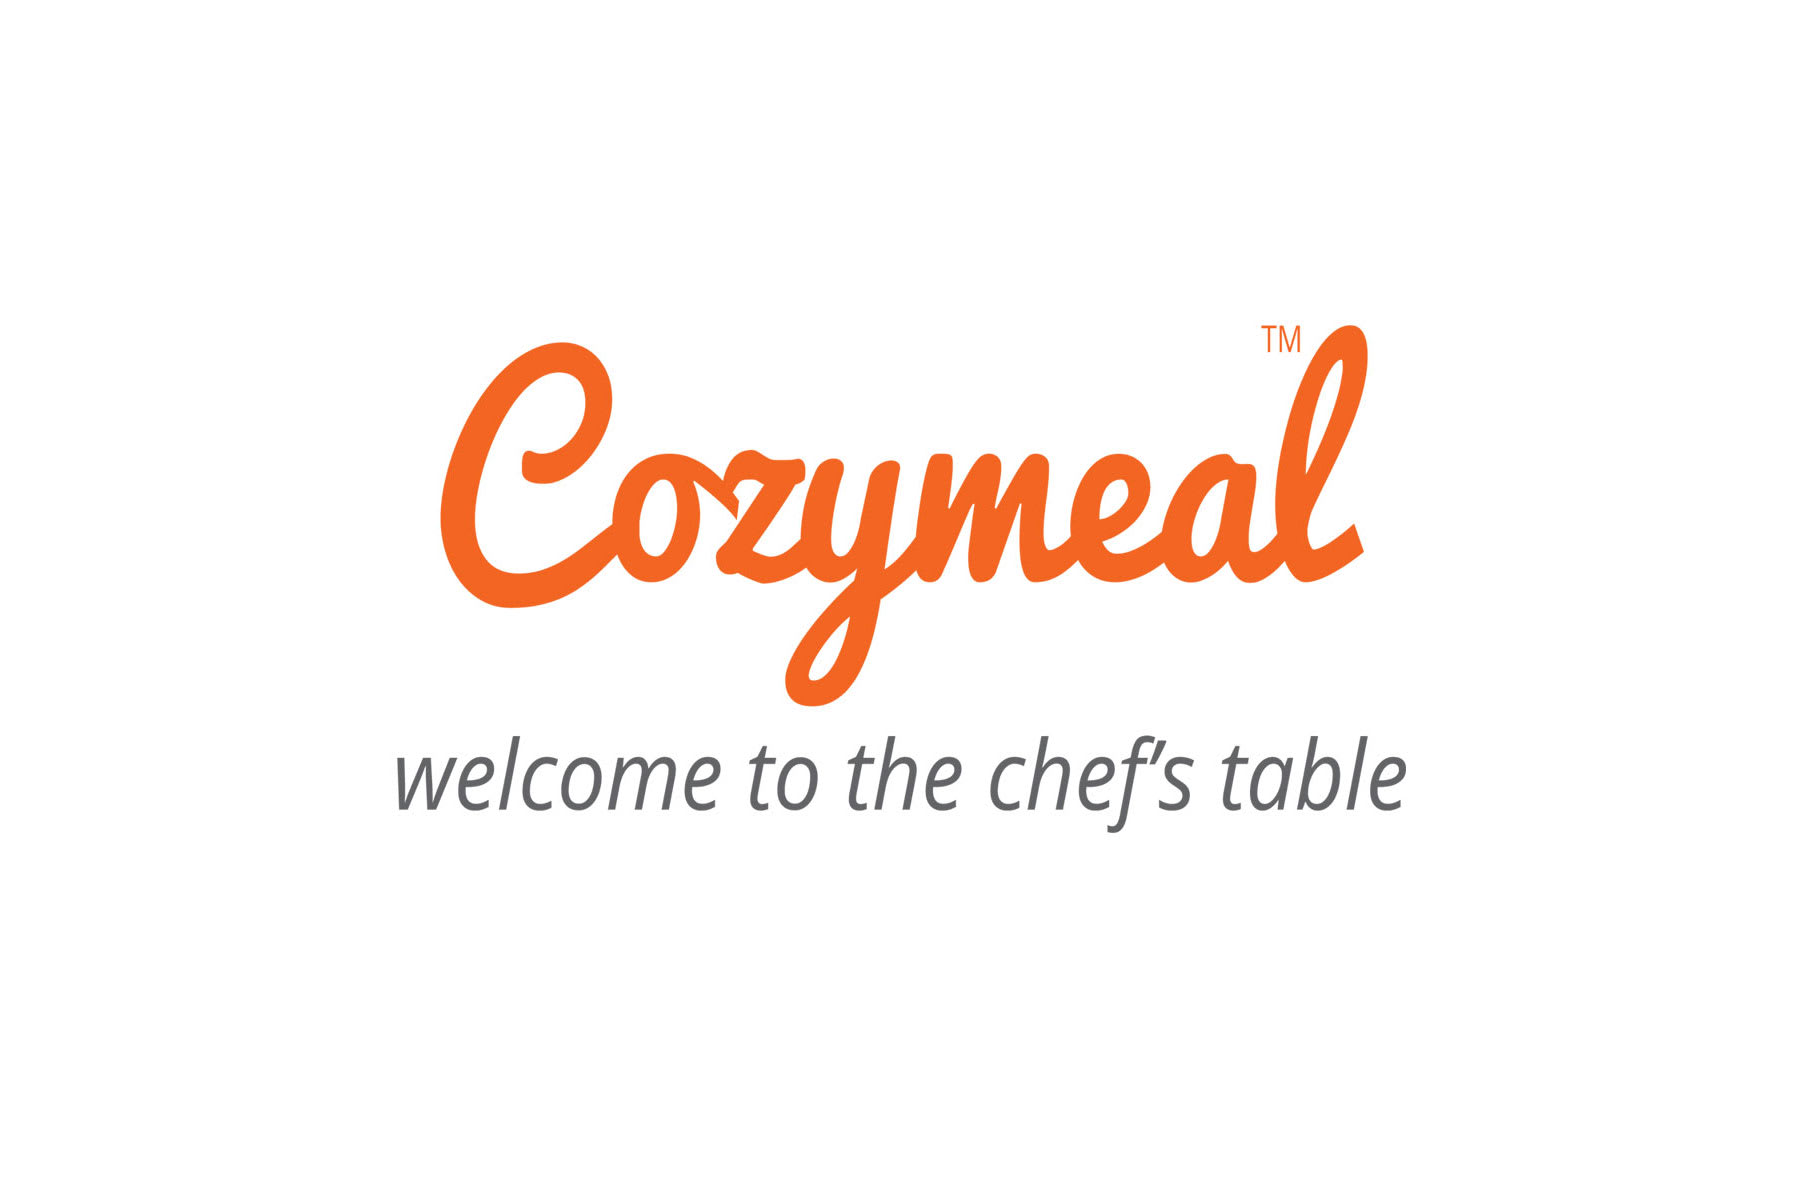 WHY Cozymeal?